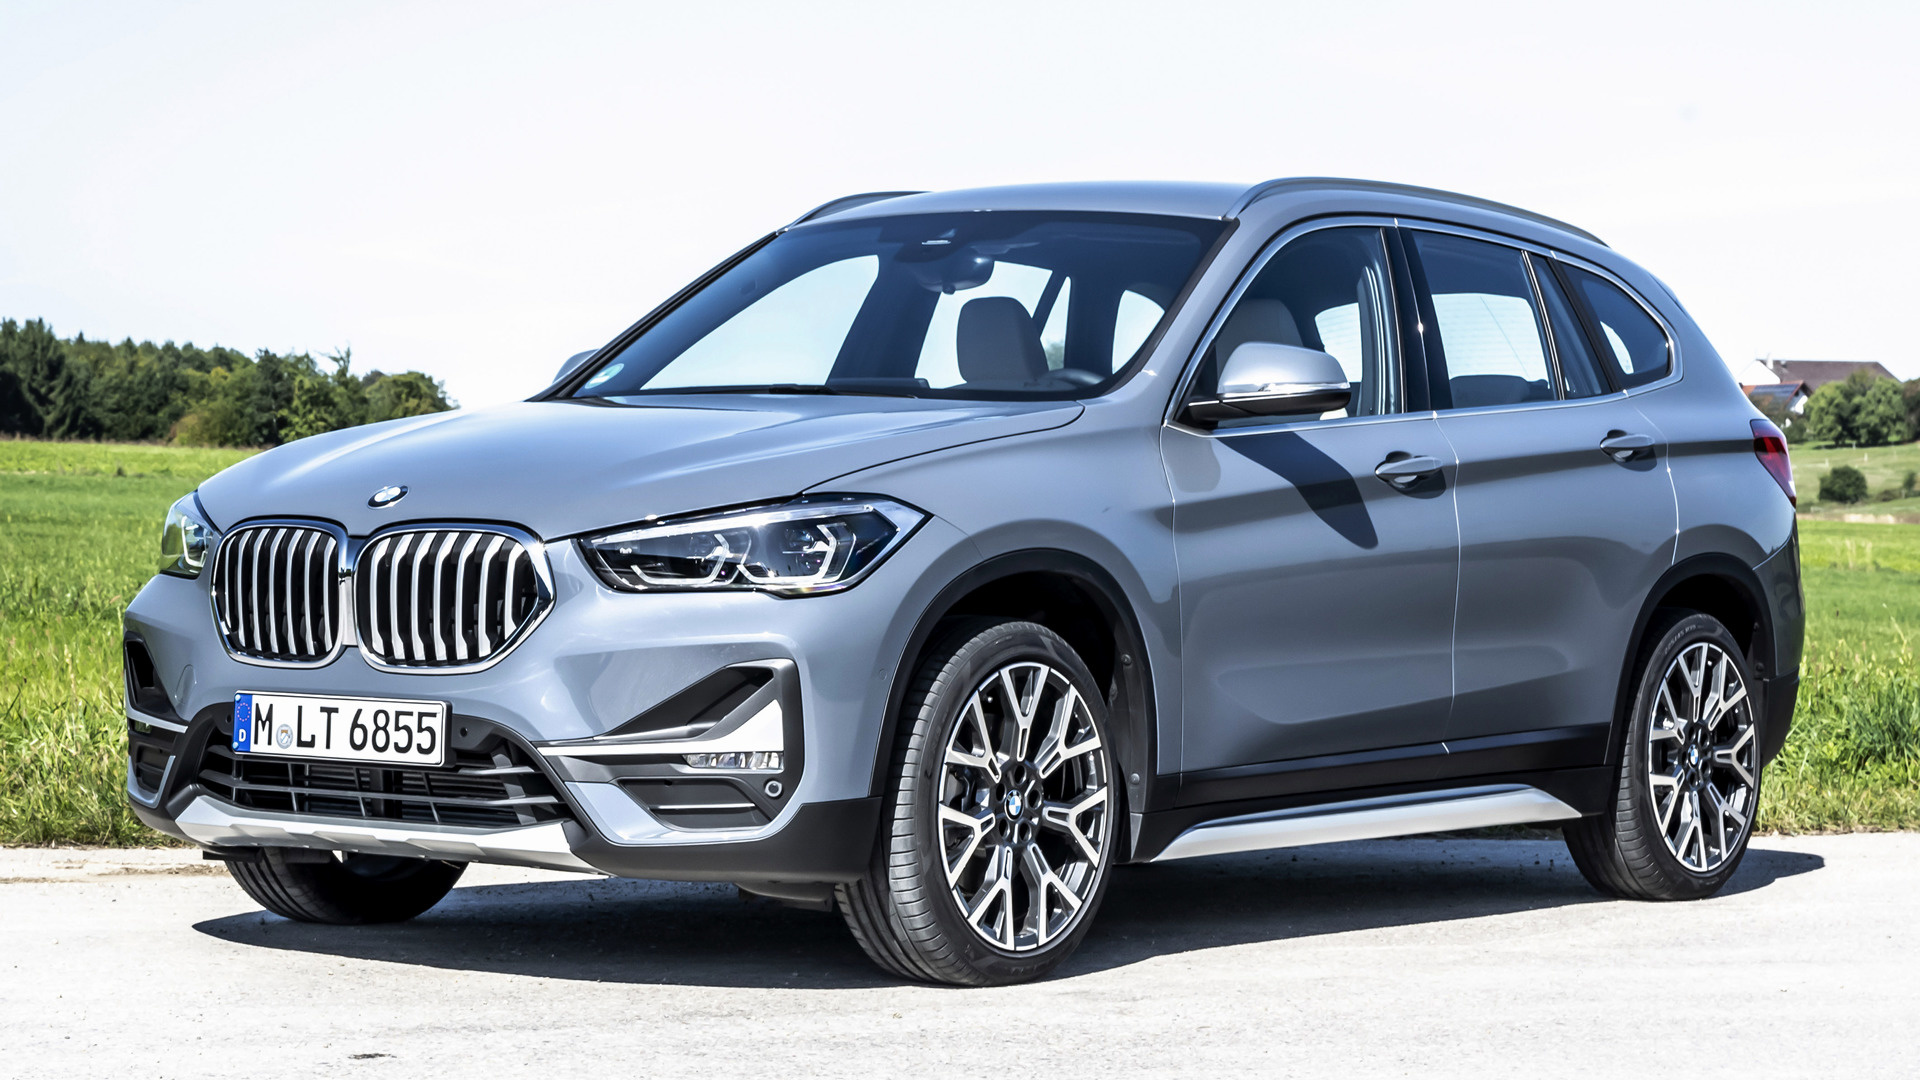 Vehicles Bmw X1 Bmw Subcompact Car Crossover Car Suv , HD Wallpaper & Backgrounds